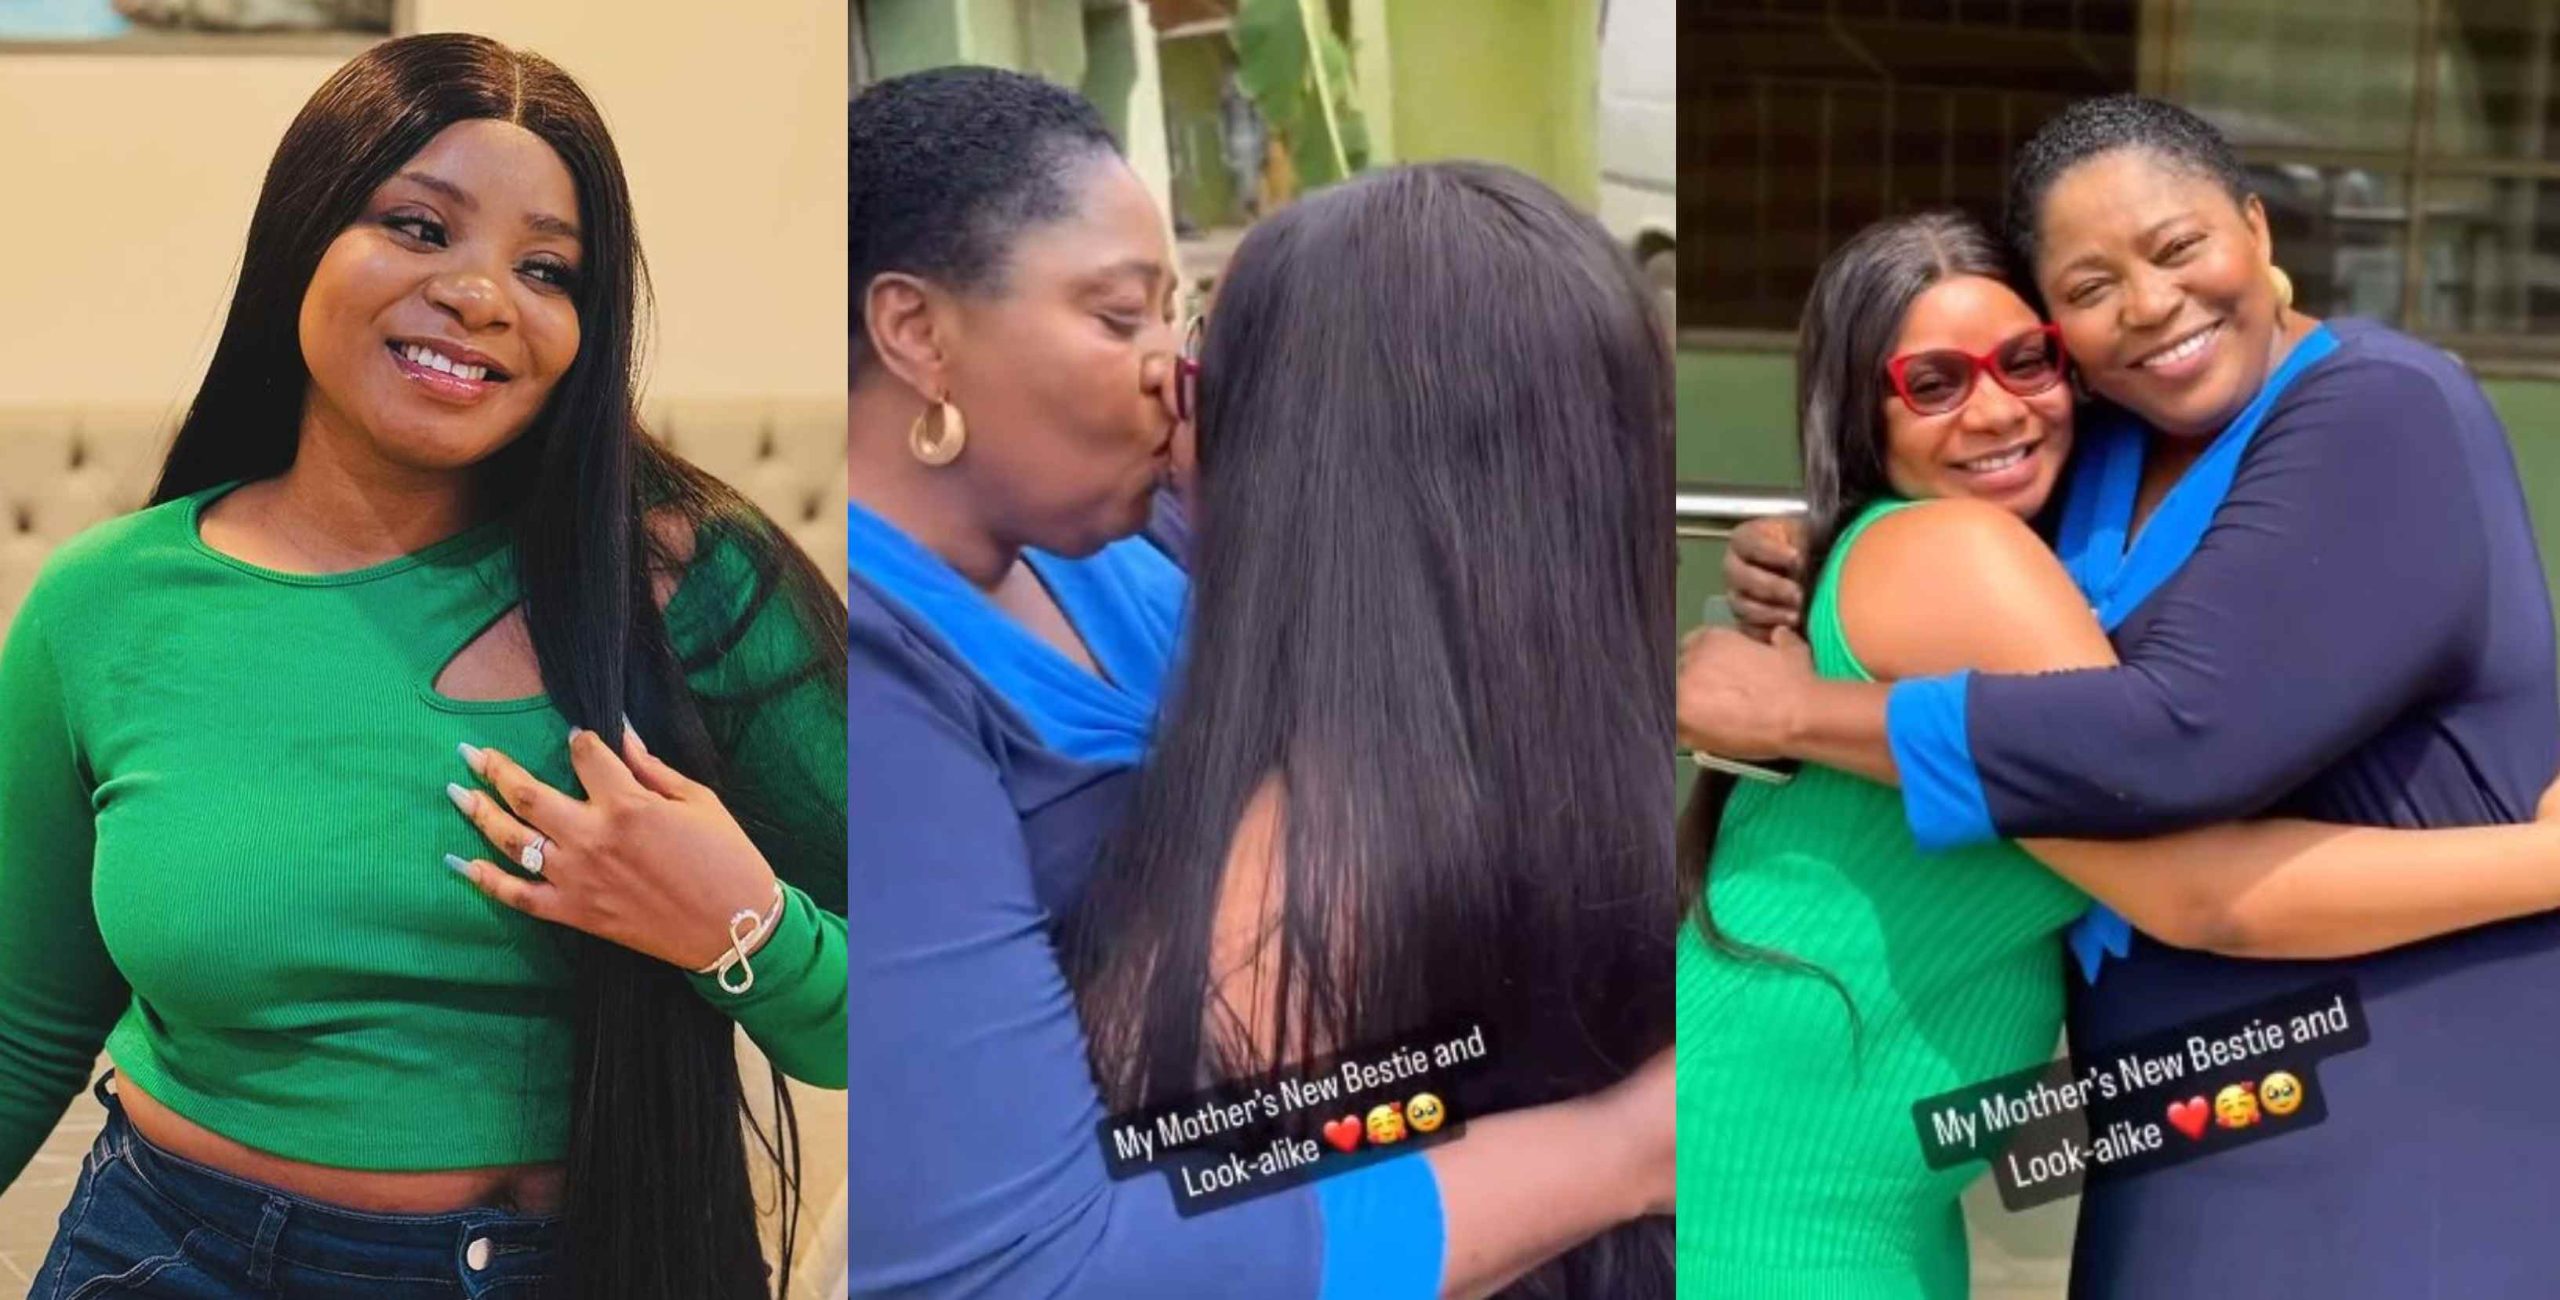 Mixed reactions as Queen kisses future mother-in-law in heartwarming video